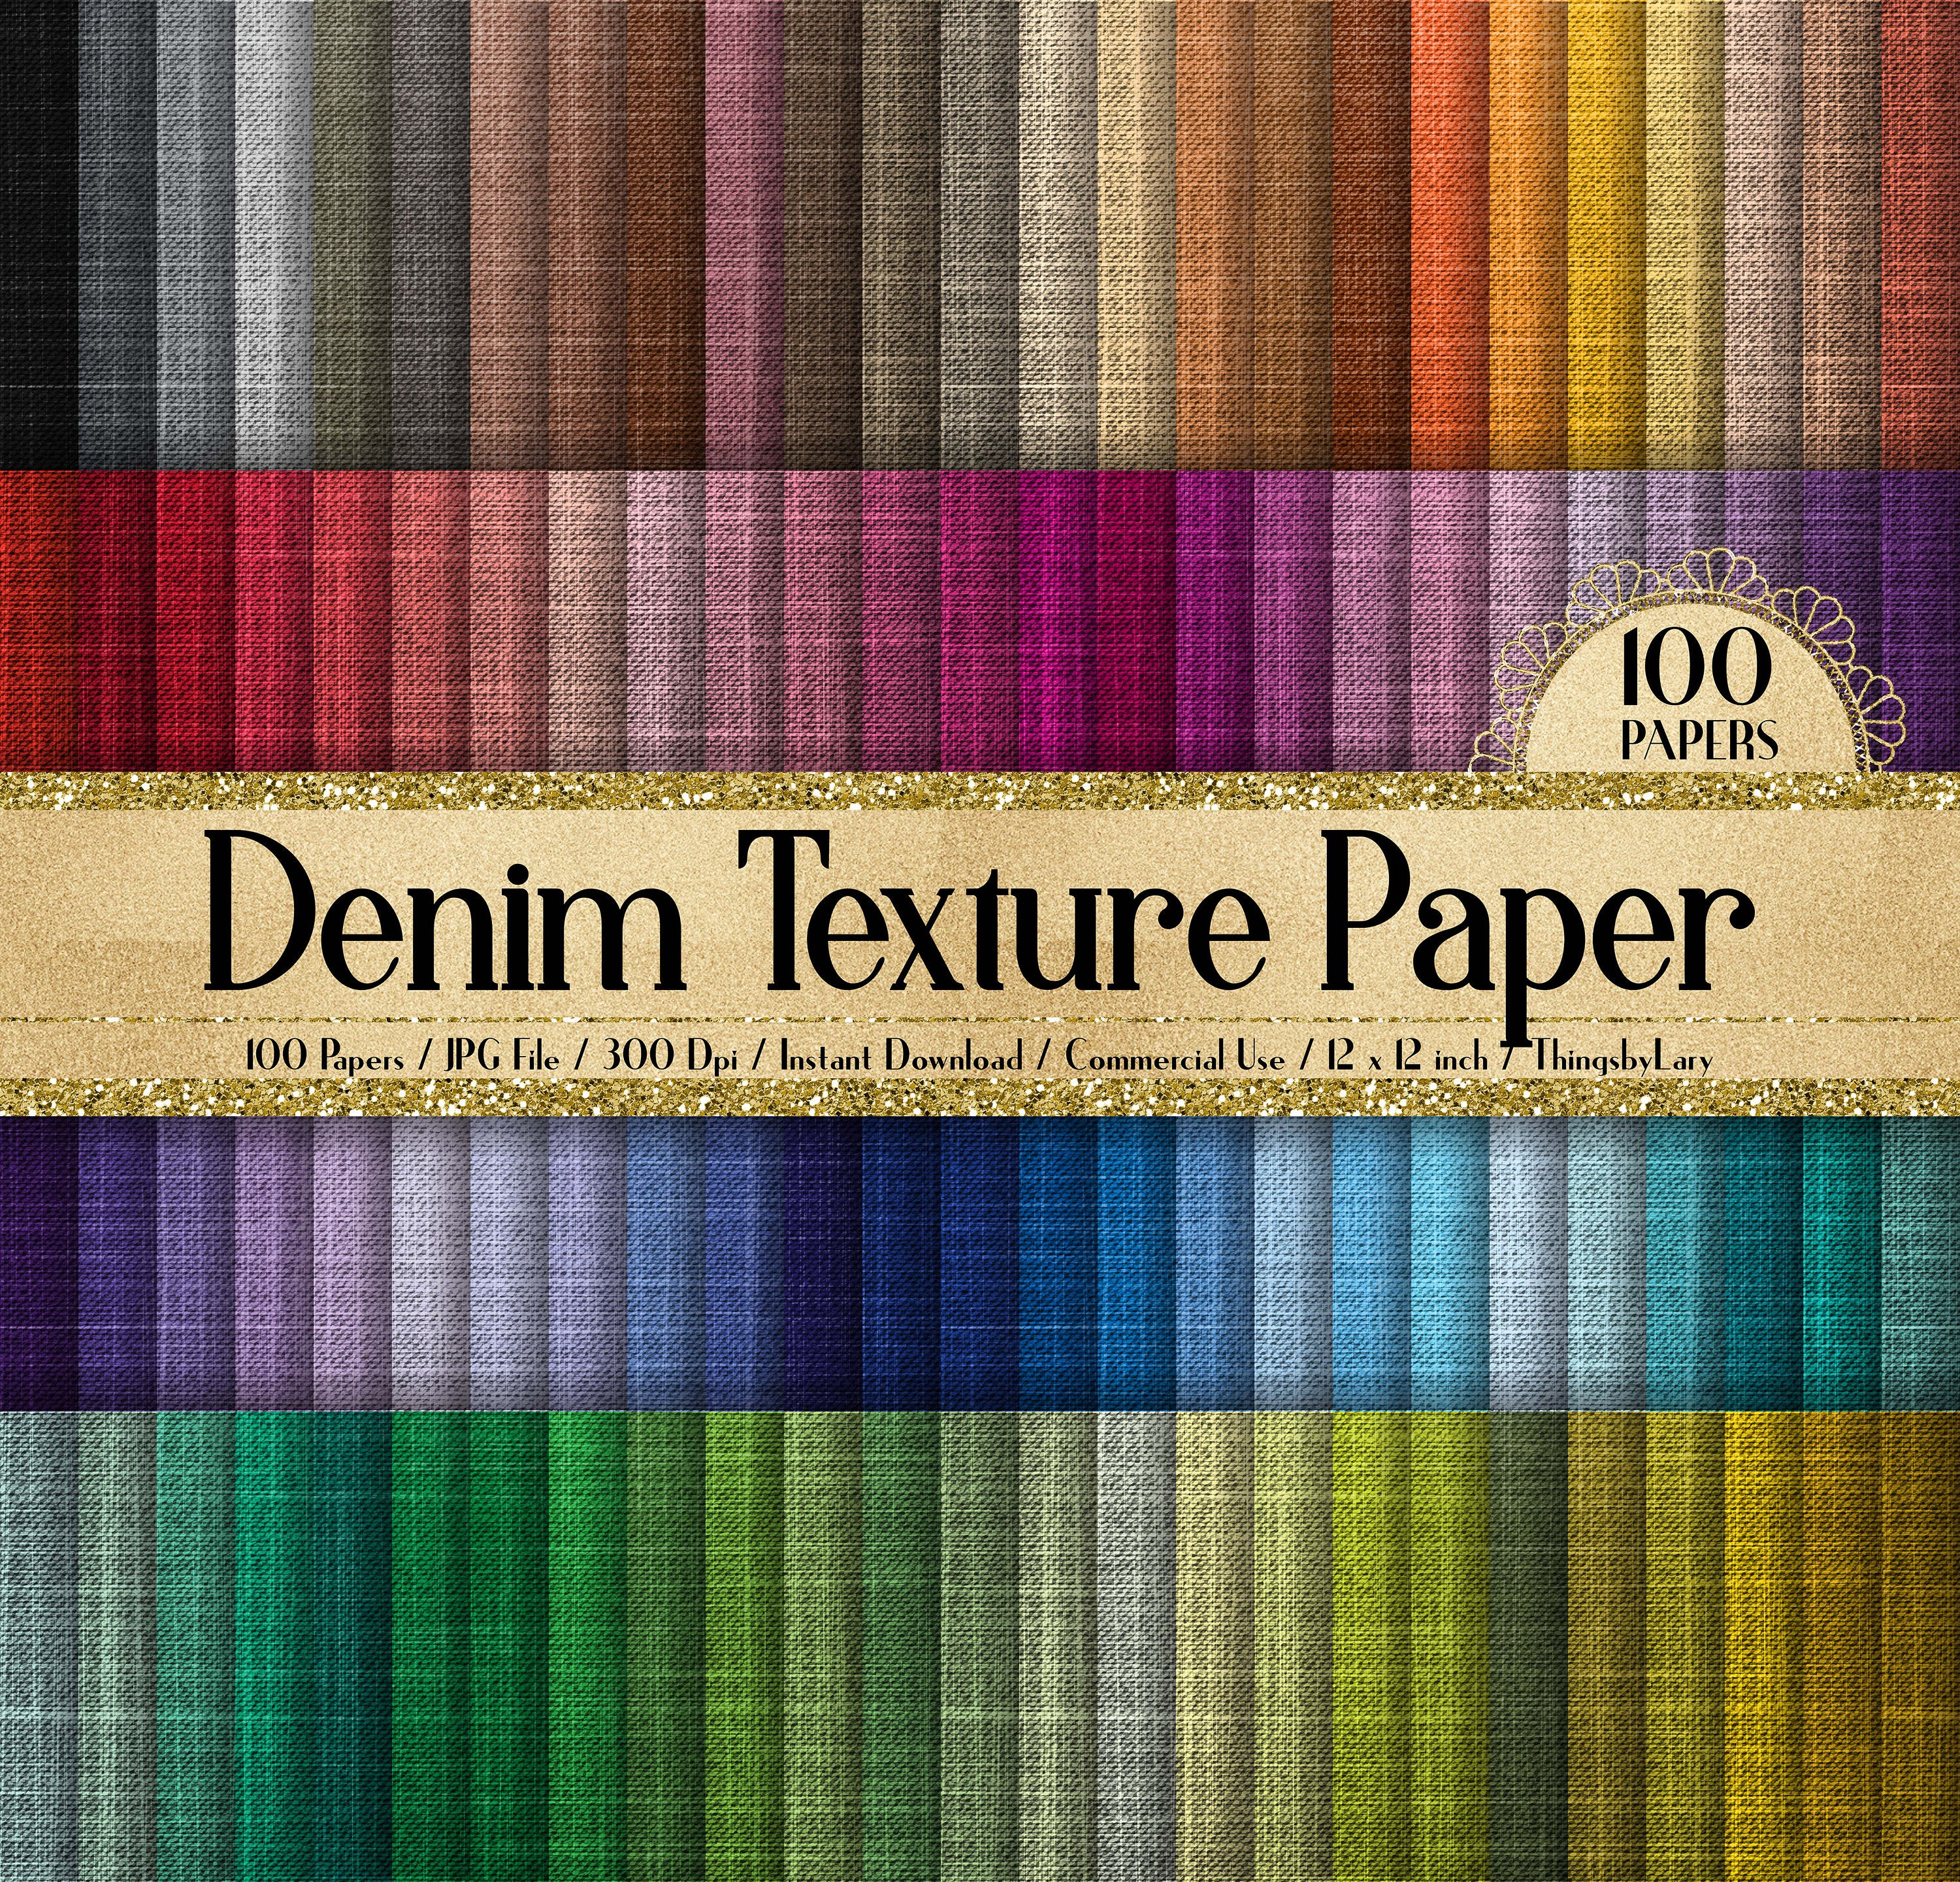 100 Denim Texture Digital Paper 12x12in 300 Dpi Planner Paper Commercial Use, Instant Download Scrapbook Papers Rainbow Paper Fabric Texture